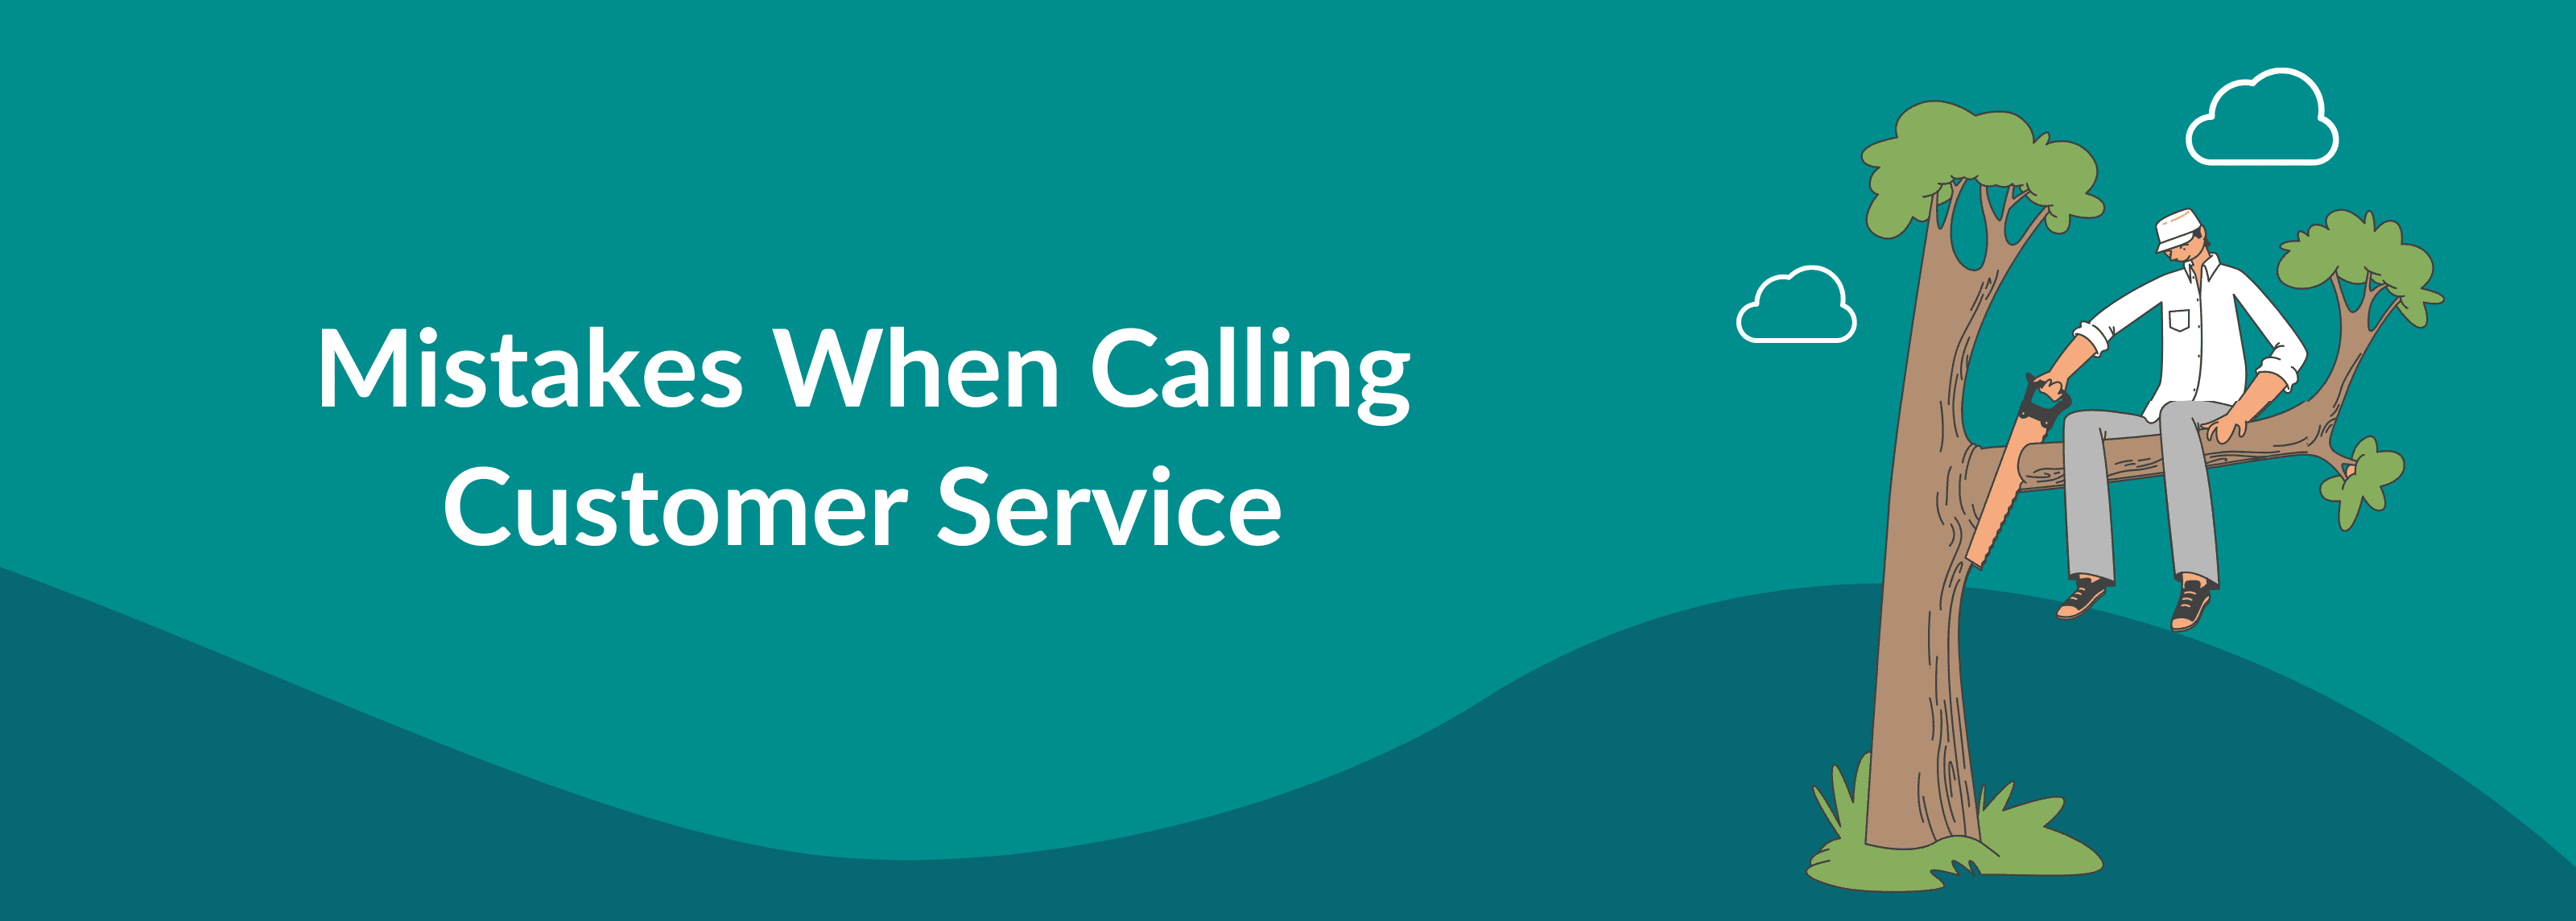 Mistakes When Calling Customer Service